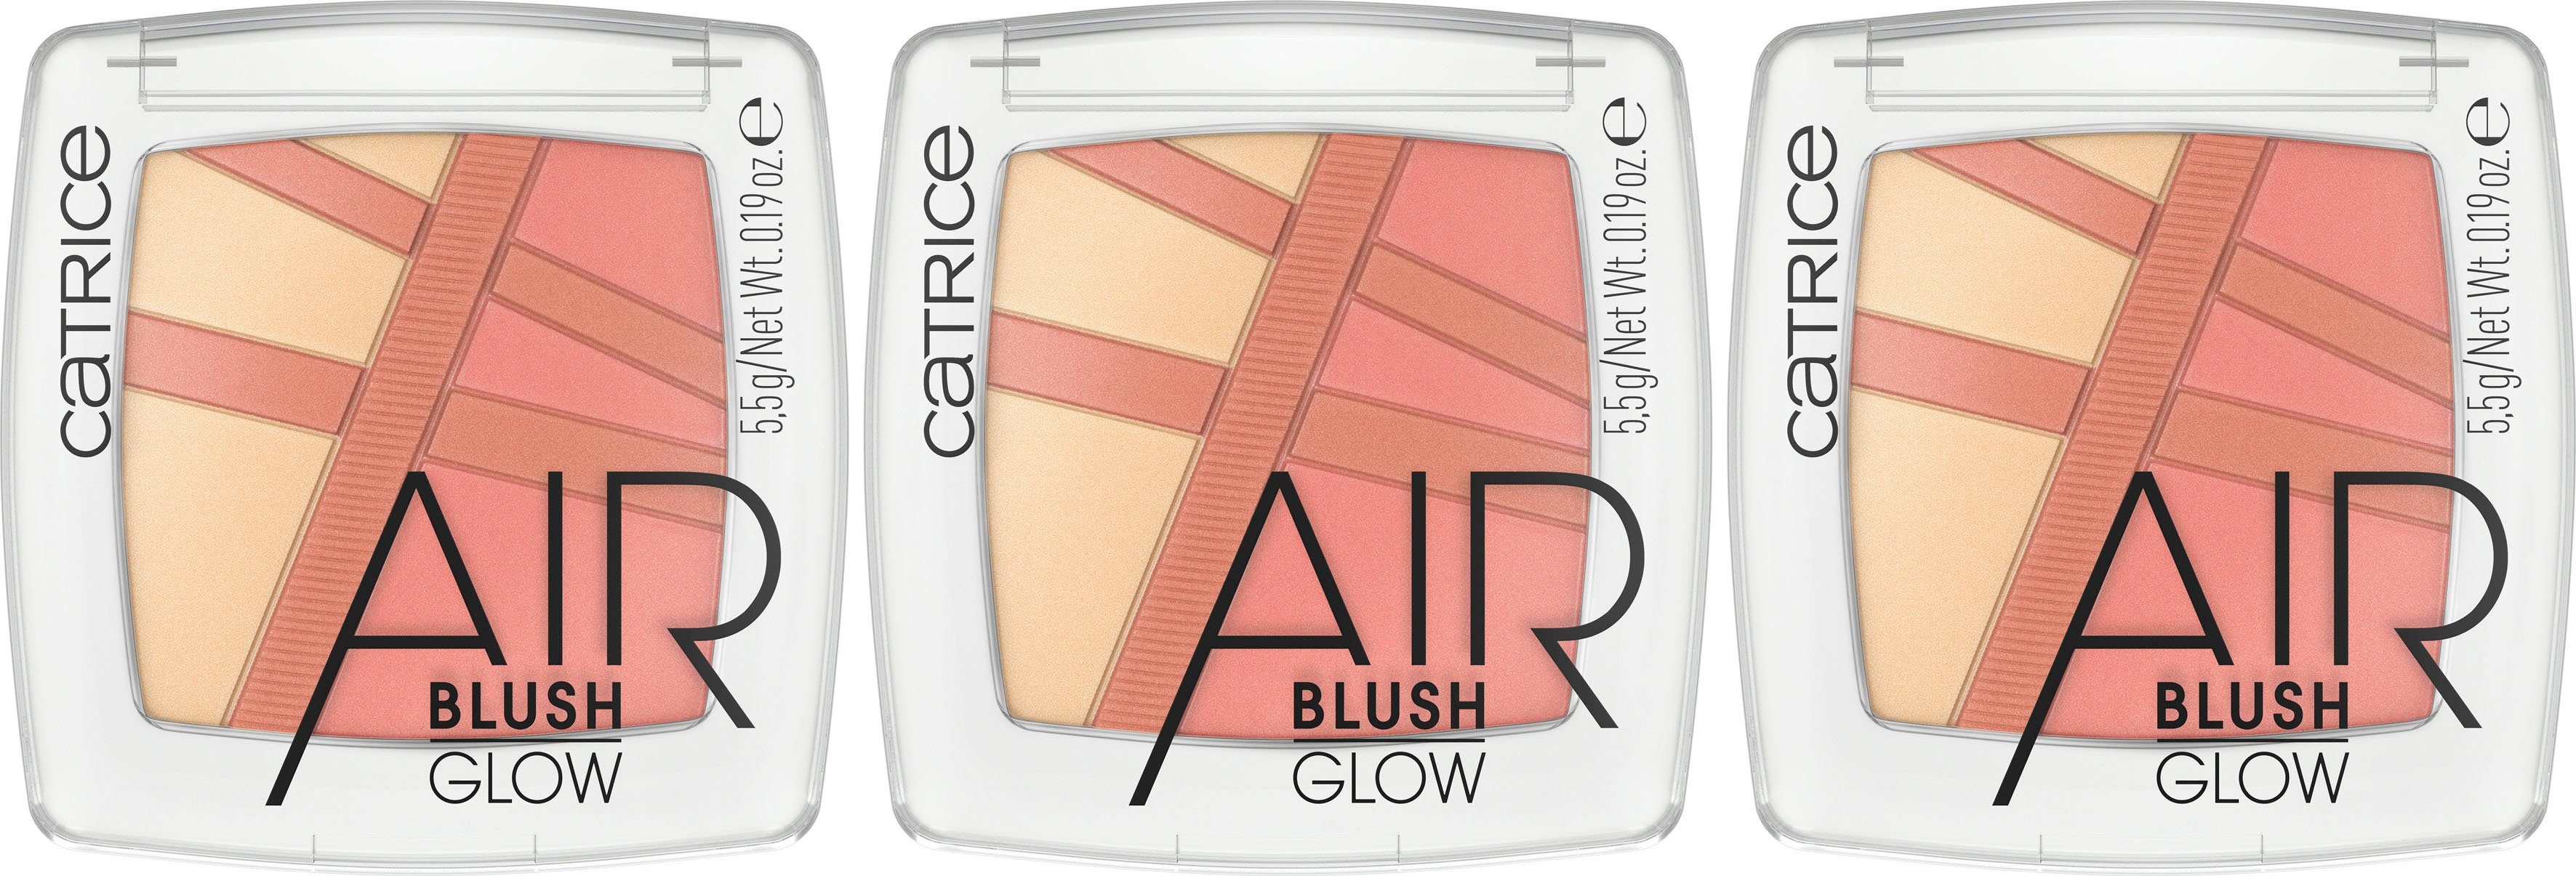 Catrice Glow, AirBlush Rouge Catrice